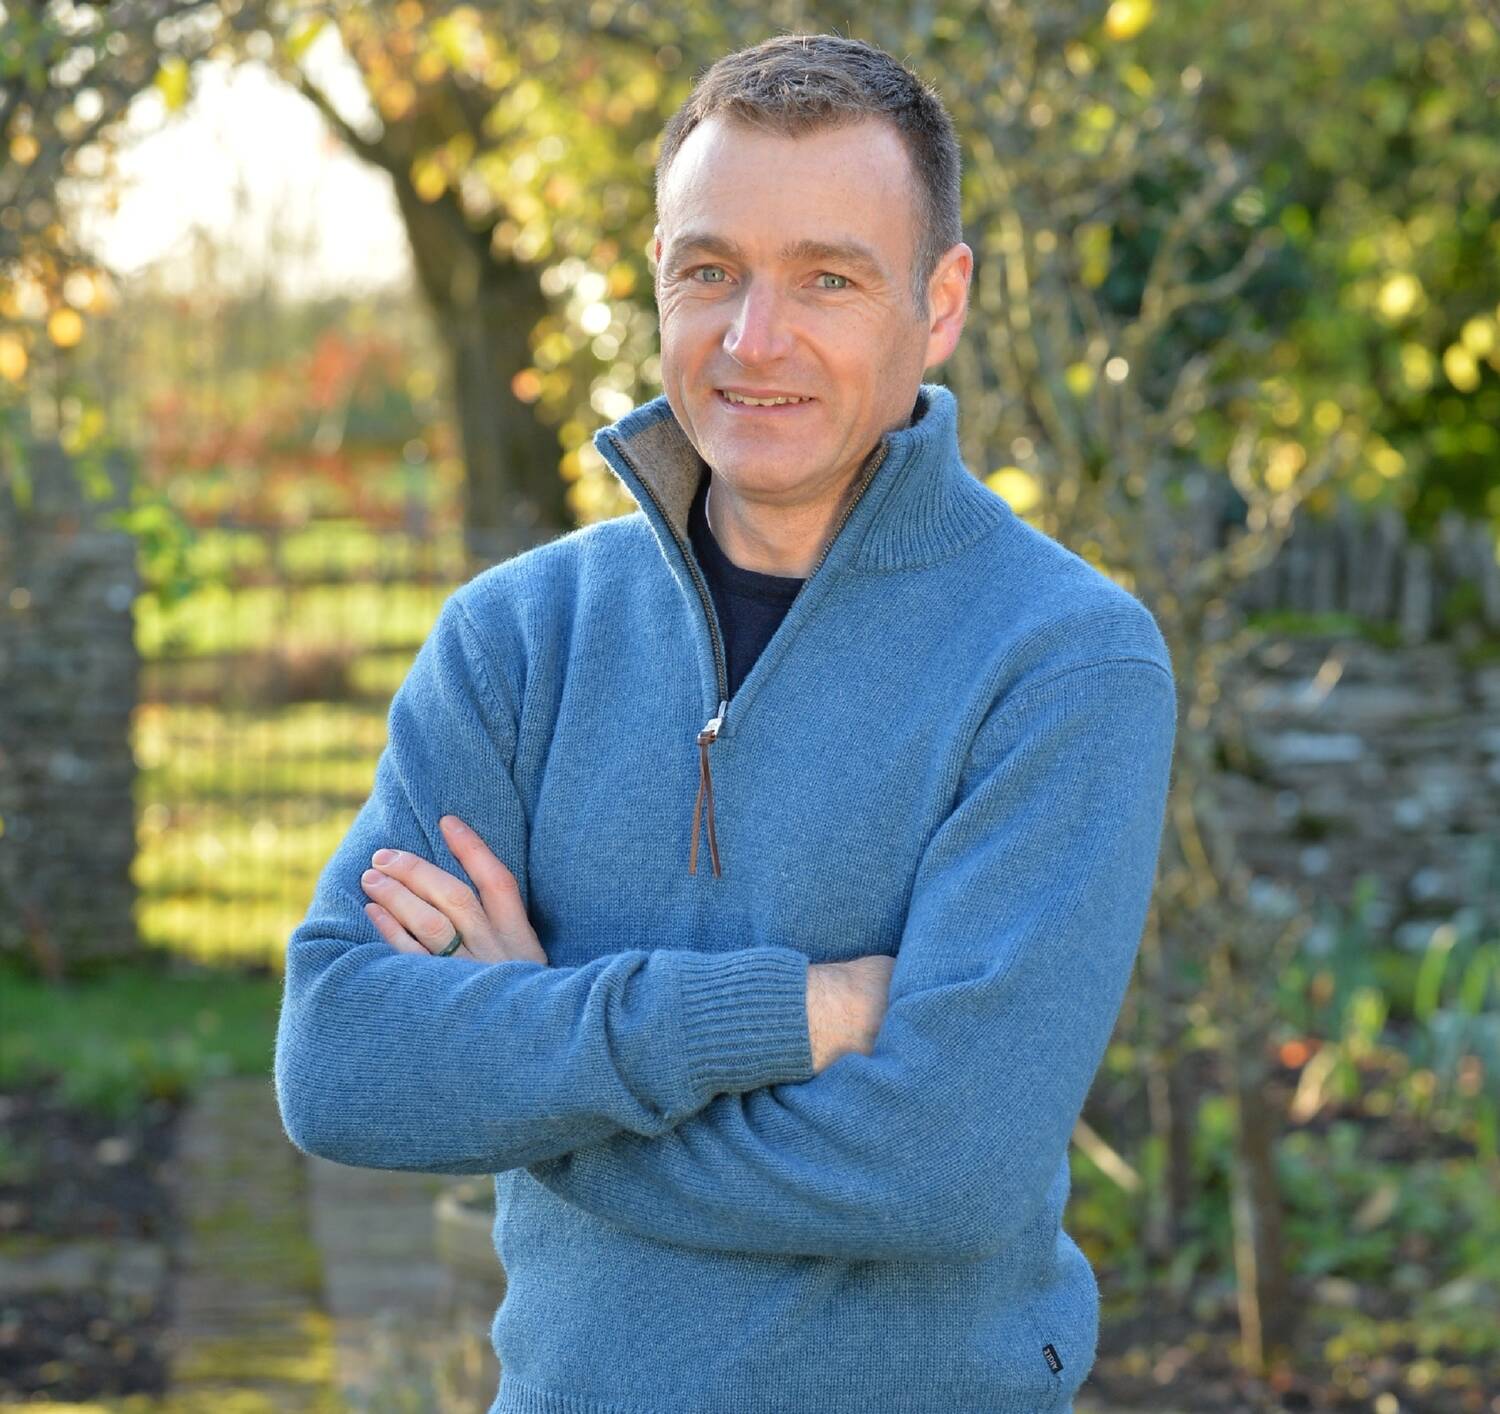 Chris Beardshaw stands in a garden, smiling at the camera with his arms folded in front of him. He wears a bright blue woolly jumper, with a half zip.